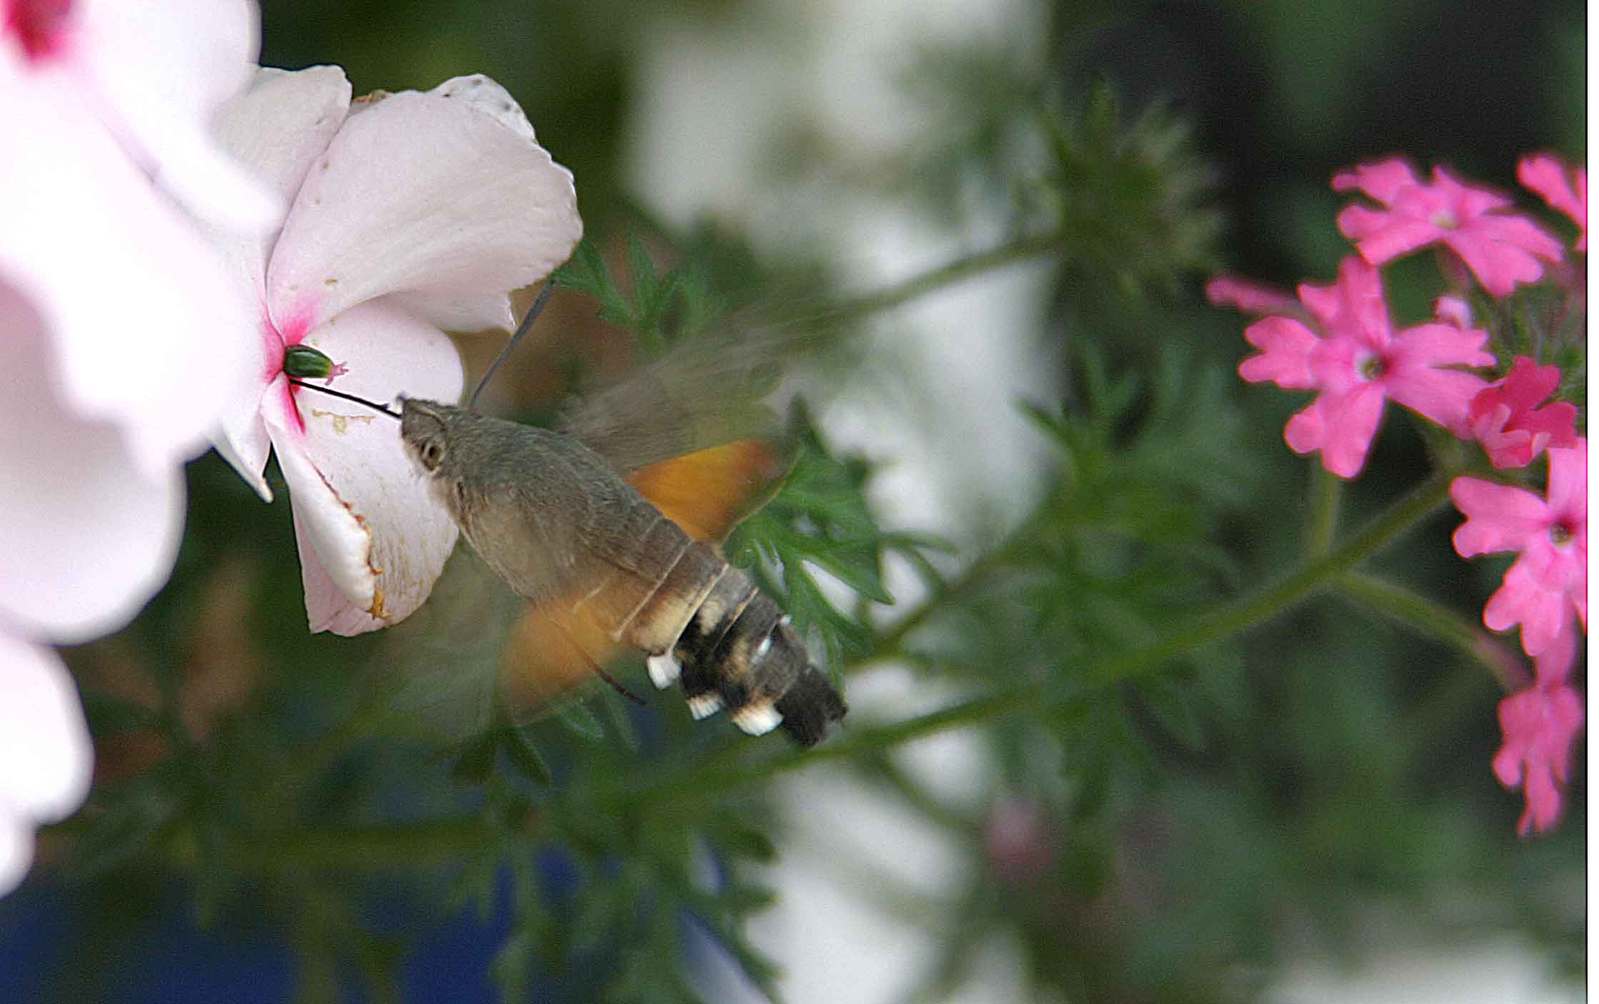 a hummingbird perched on a pink flower, surrounded by white and red flowers